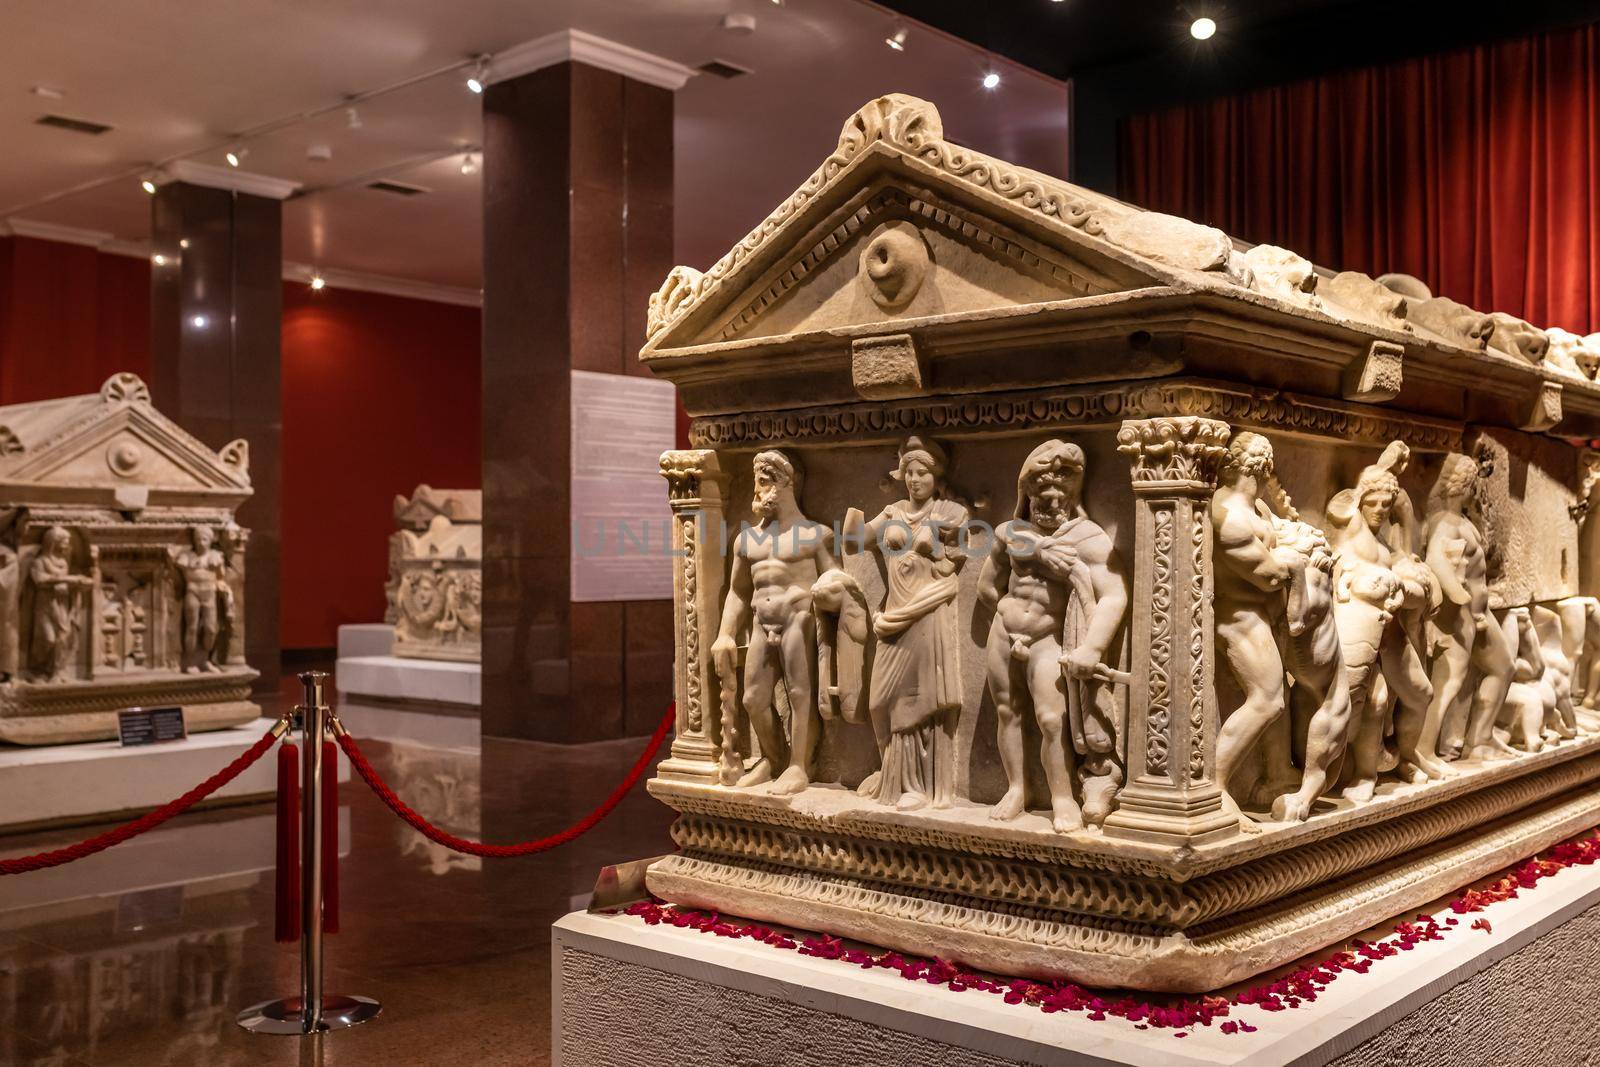 ANTALYA, TURKEY - JANUARY 18, 2020: The Heracles Sarcophagus. Antalya Archeological Museum is one of Turkey's largest museums located in Antalya city in Turkey